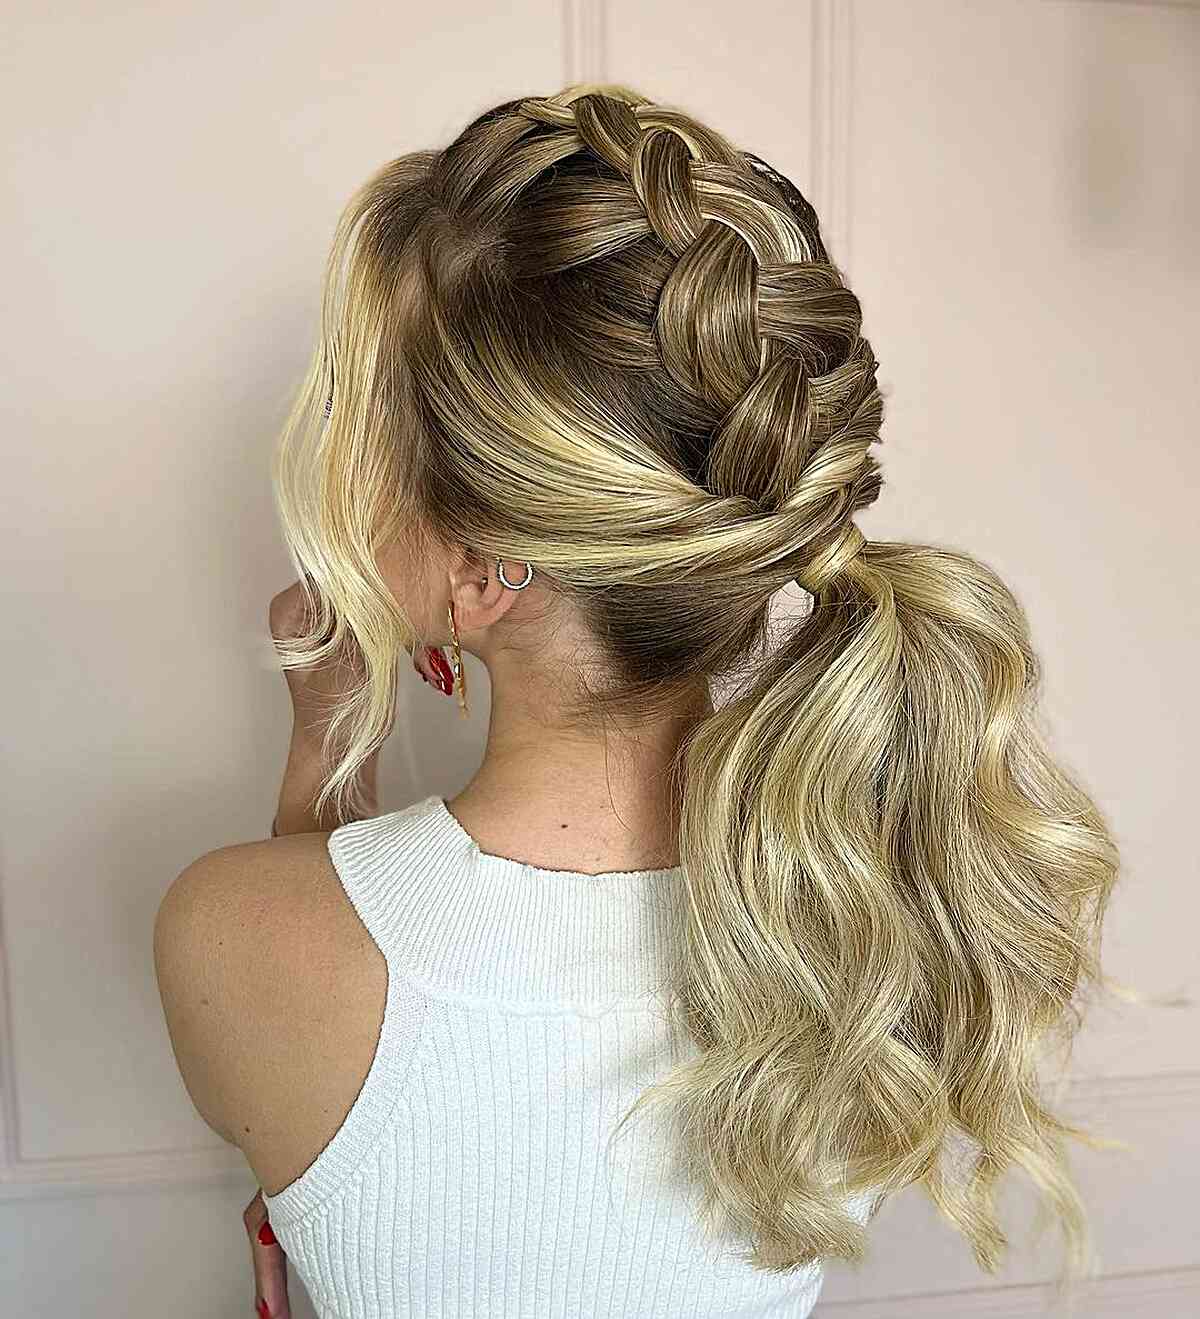 Cute Pony with a Braided Top for blonde long hair